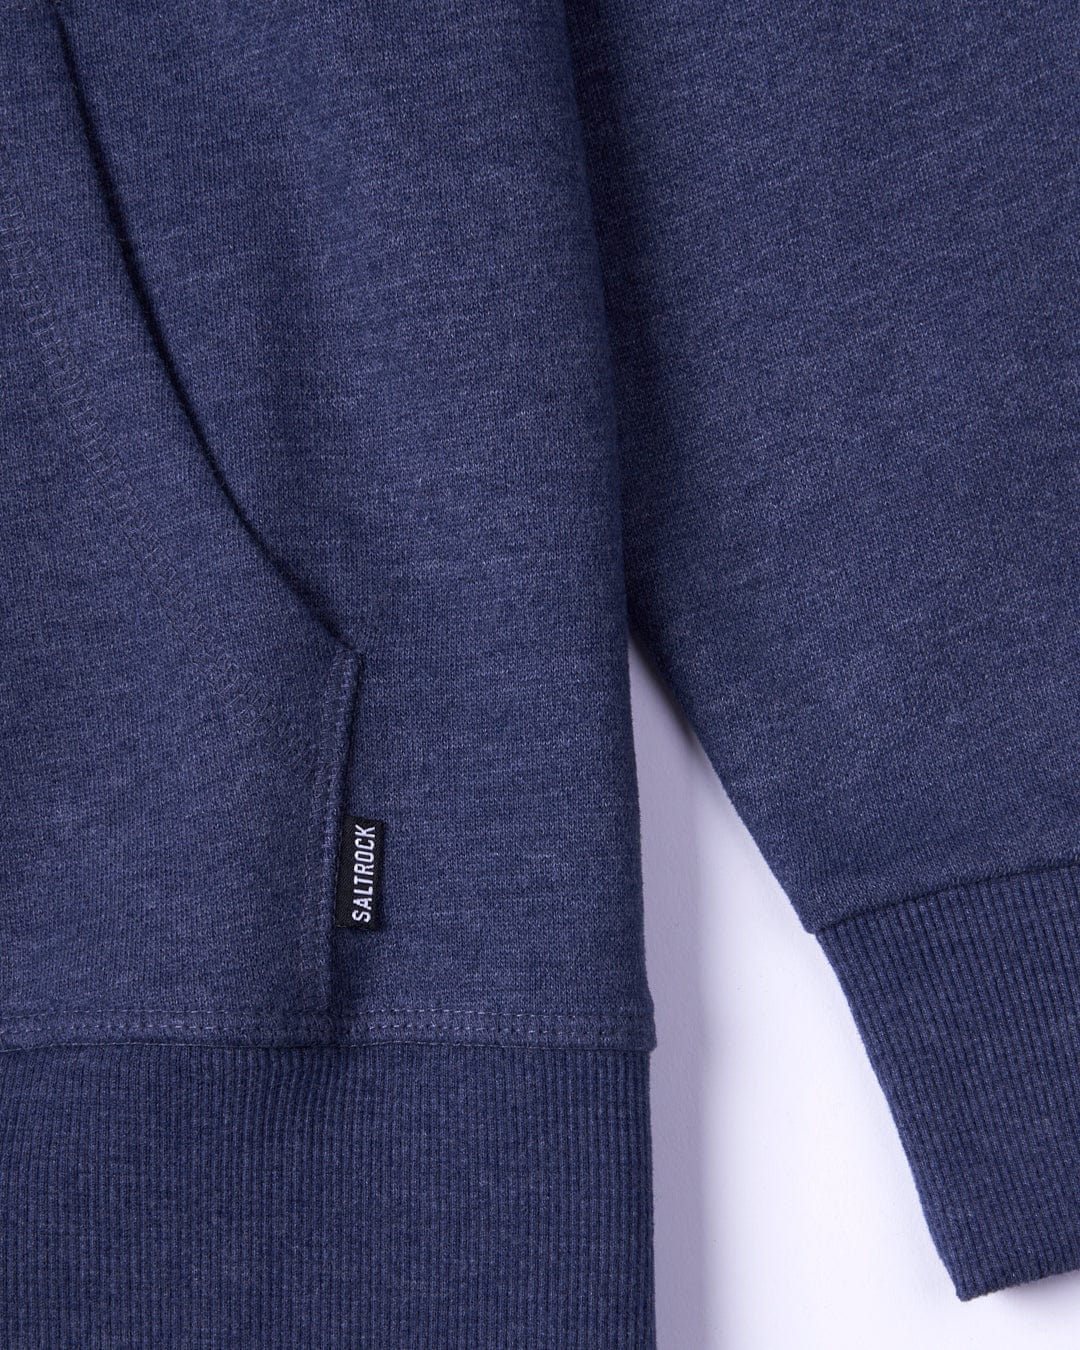 Close-up of a Velator - Womens Pop Hoodie - Dark Blue with ribbed cuffs, featuring a small white label stitched on the left cuff that reads "Saltrock," and constructed from a soft material.